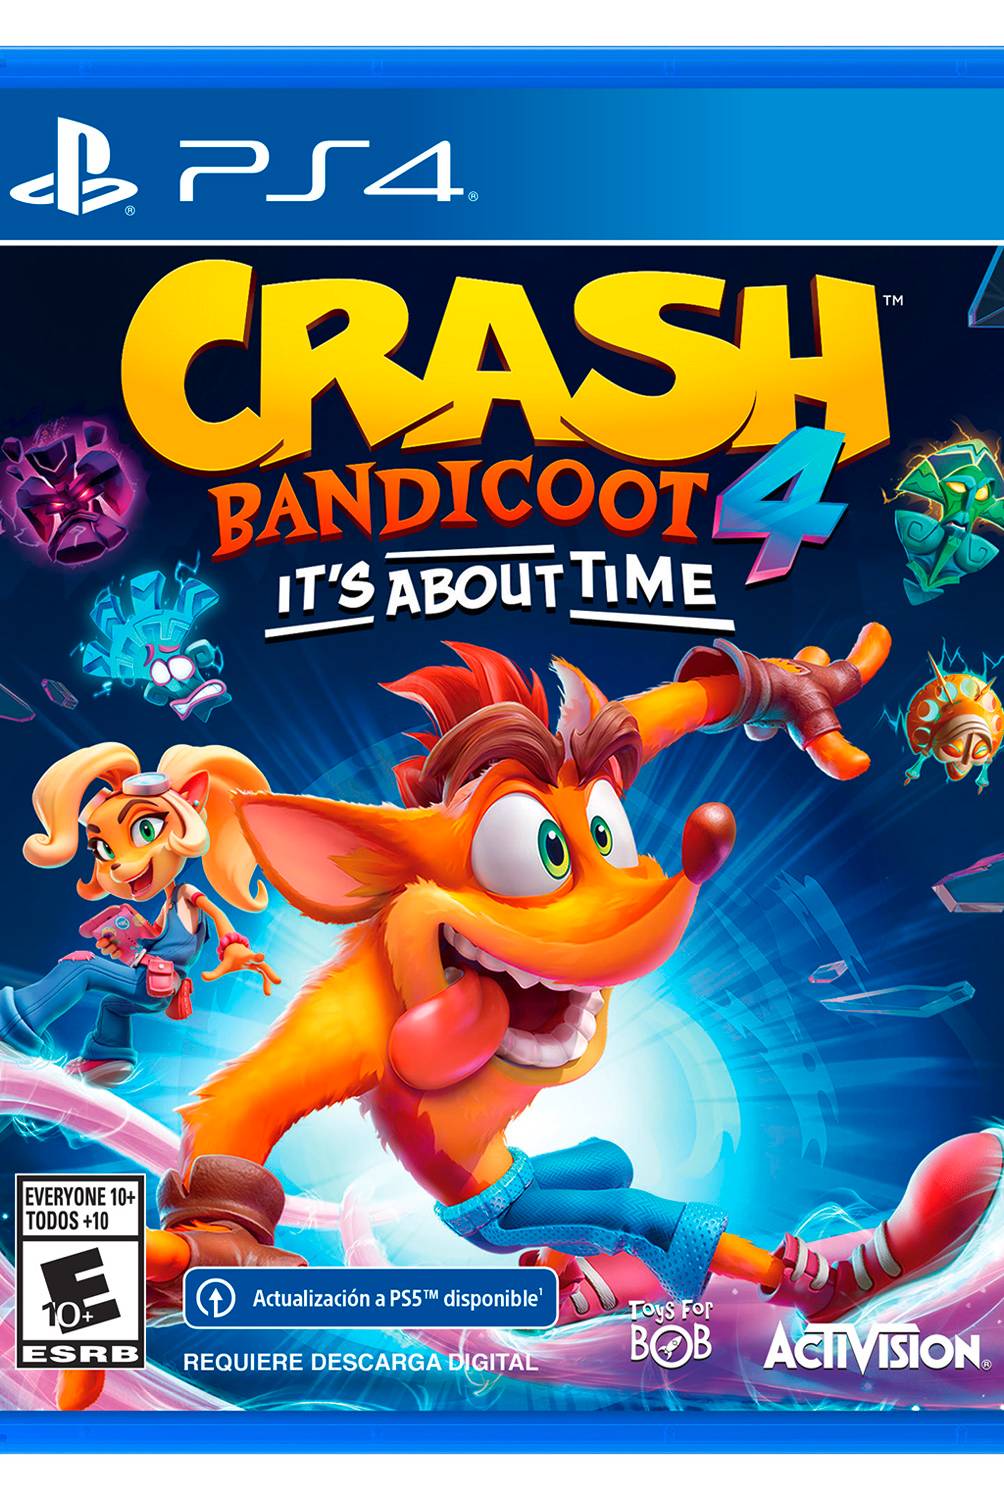 Activision - Videojuego Crash Bandicoot4 Its About Time PS4